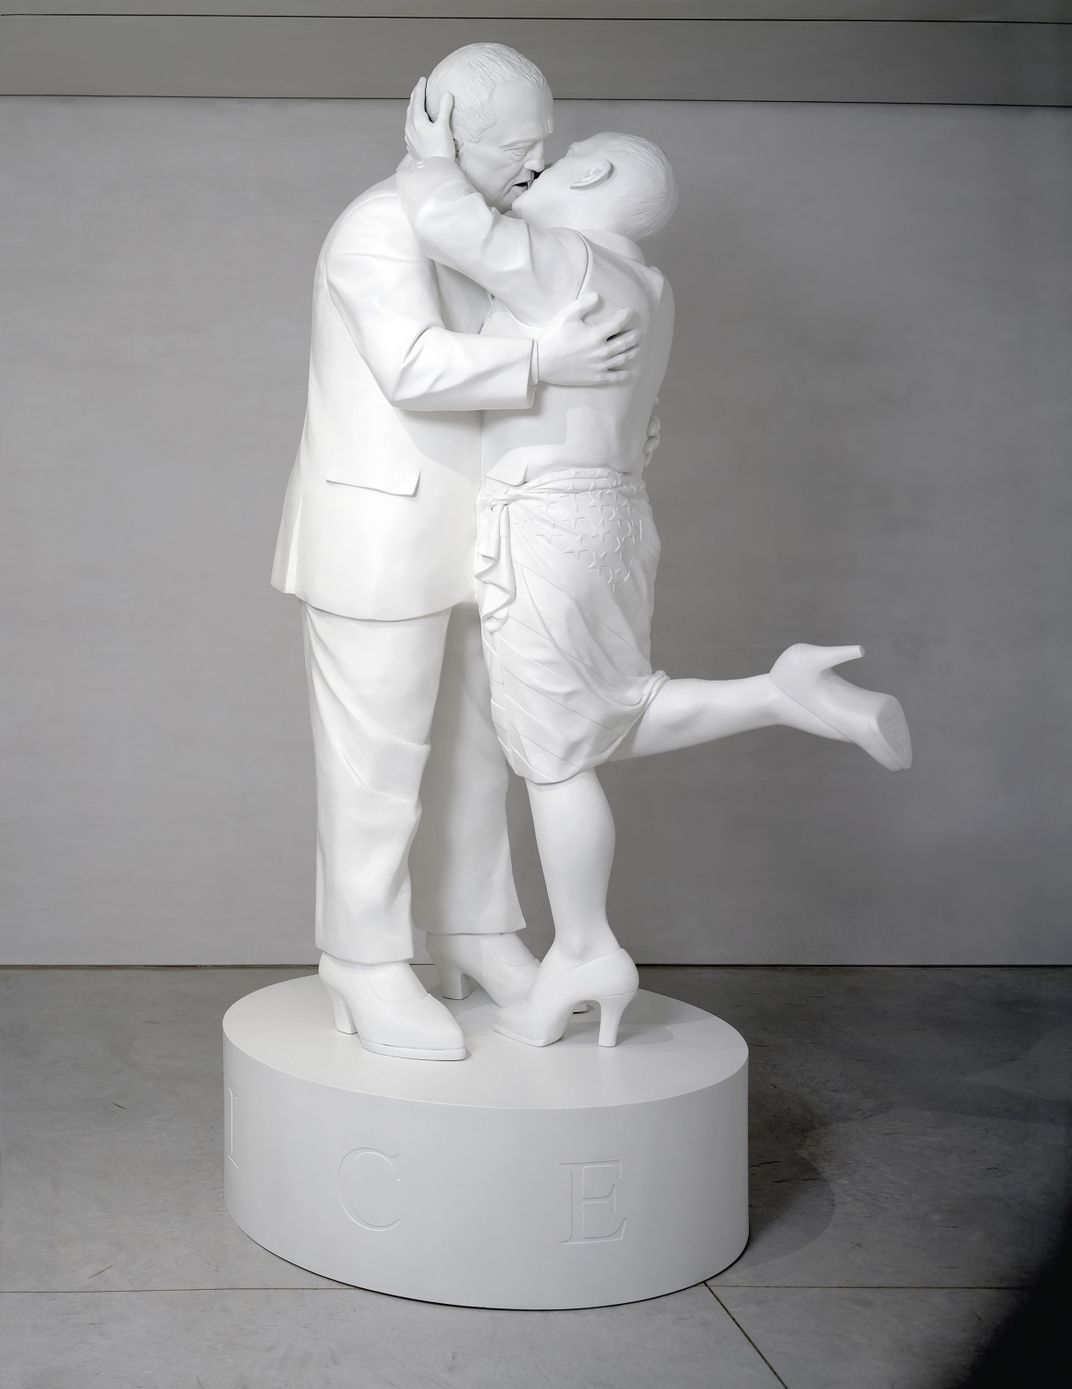 A white statue, in neoclassical fashion, of two men in high heels and suits kissing